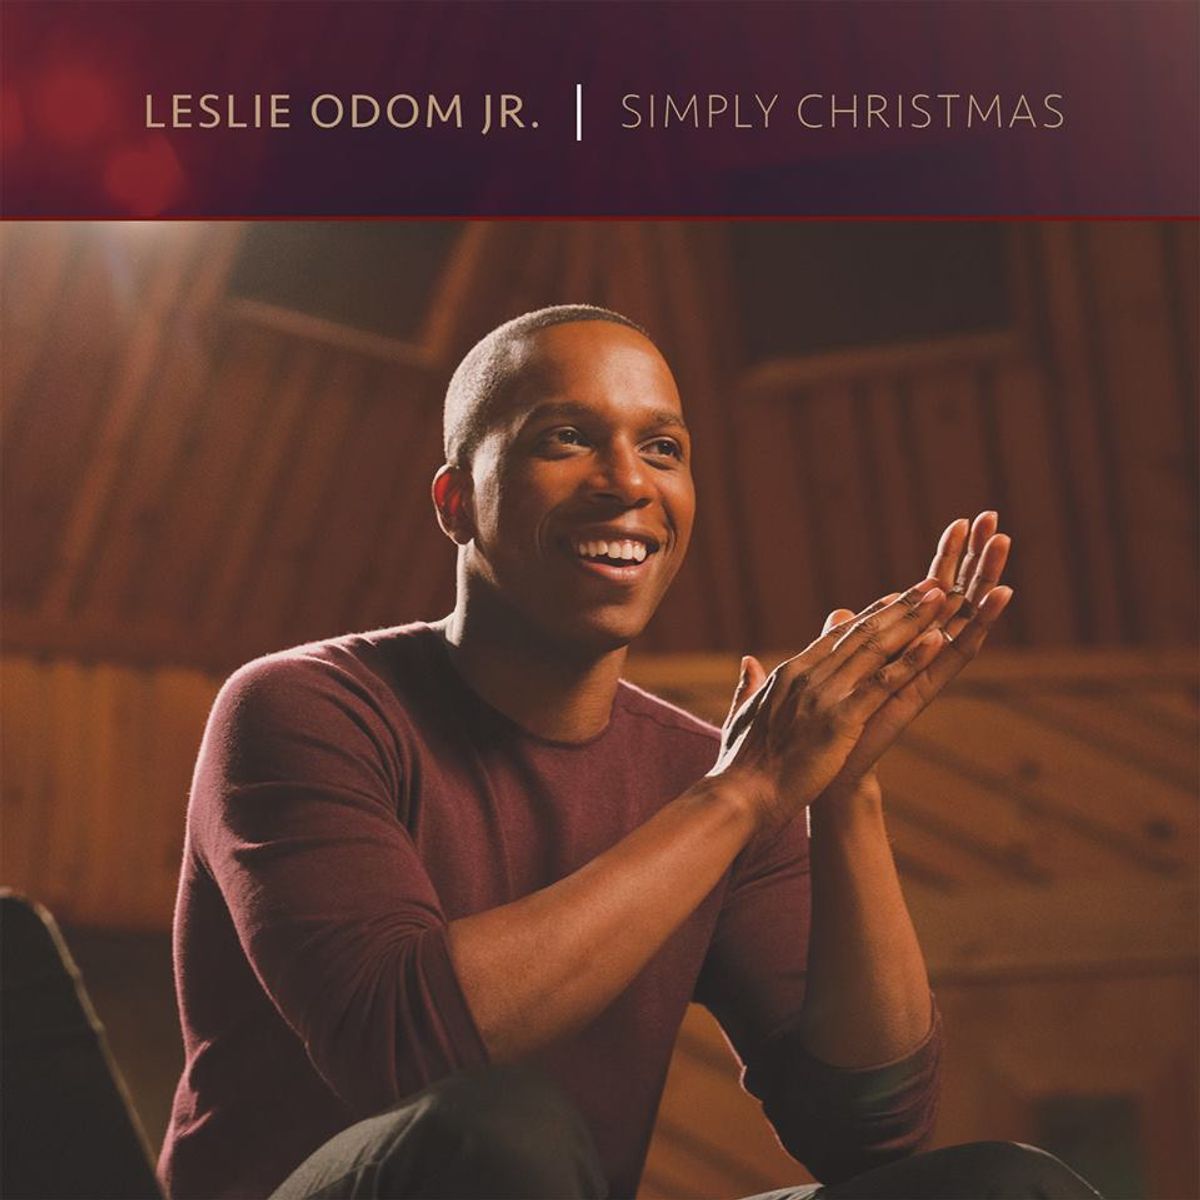 Leslie Odom Jr.'s New Christmas Album is a Must Have this Holiday Season